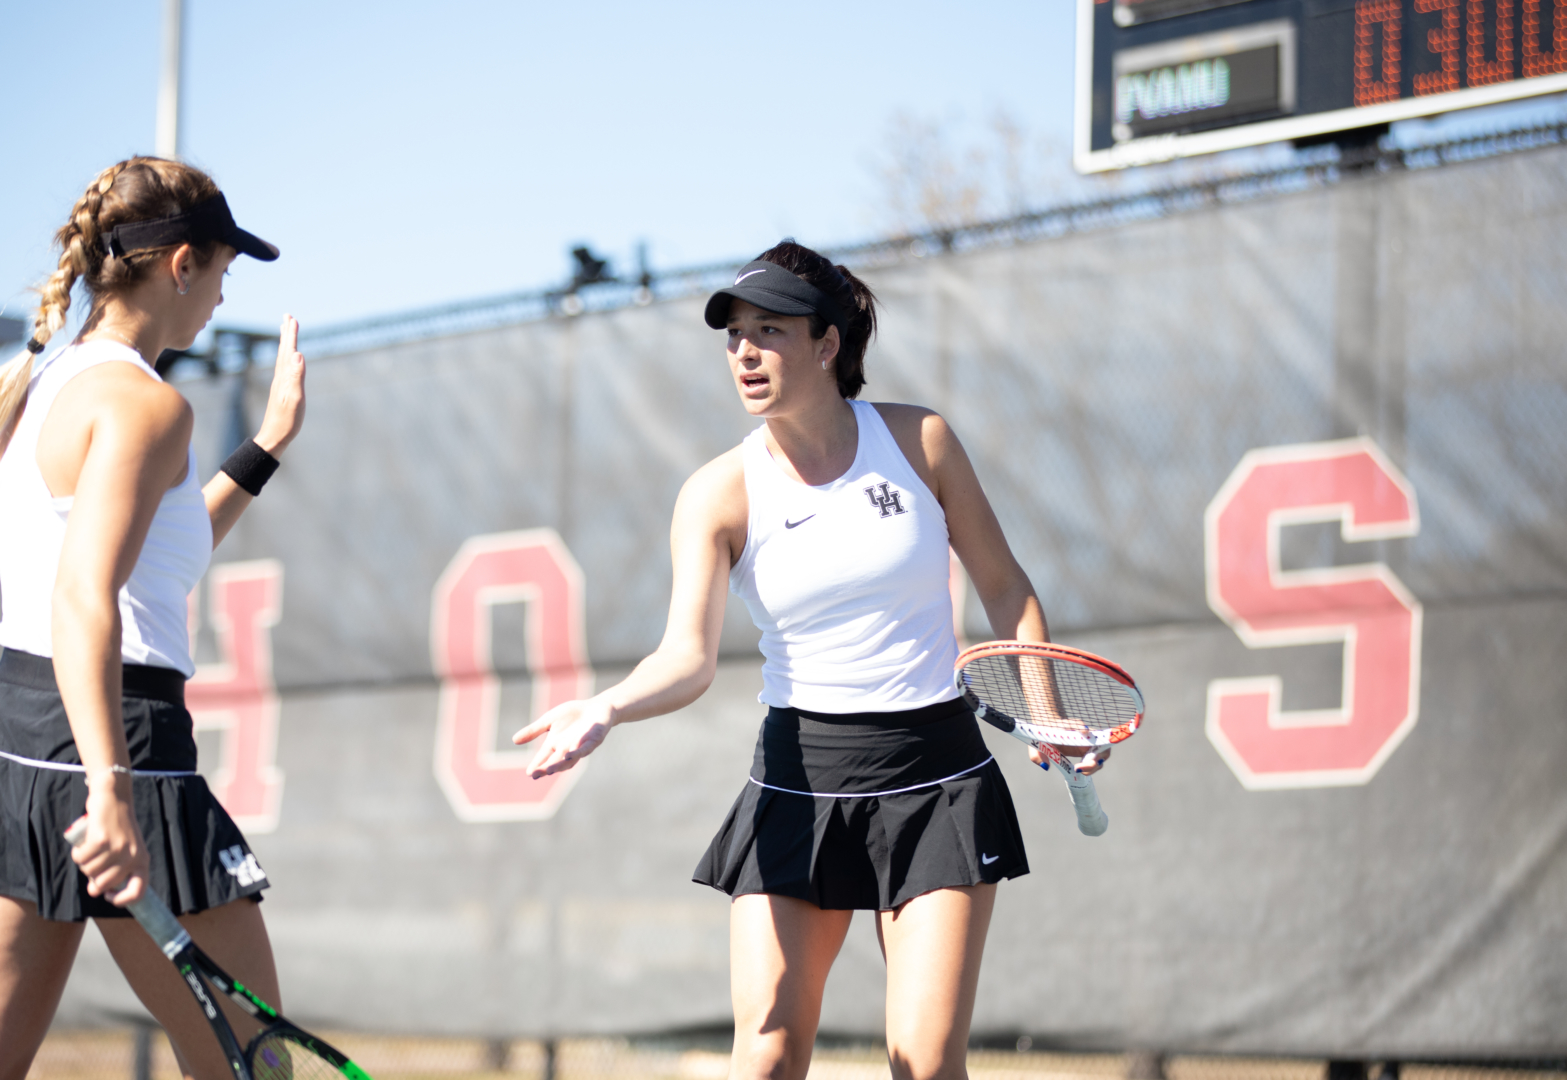 UH Tennis had a weekend packed with matches, playing Alabama in Tuscaloosa Friday and Southern University and Prarie View A&M in a double header on Sunday. | Sean Thomas/The Cougar.